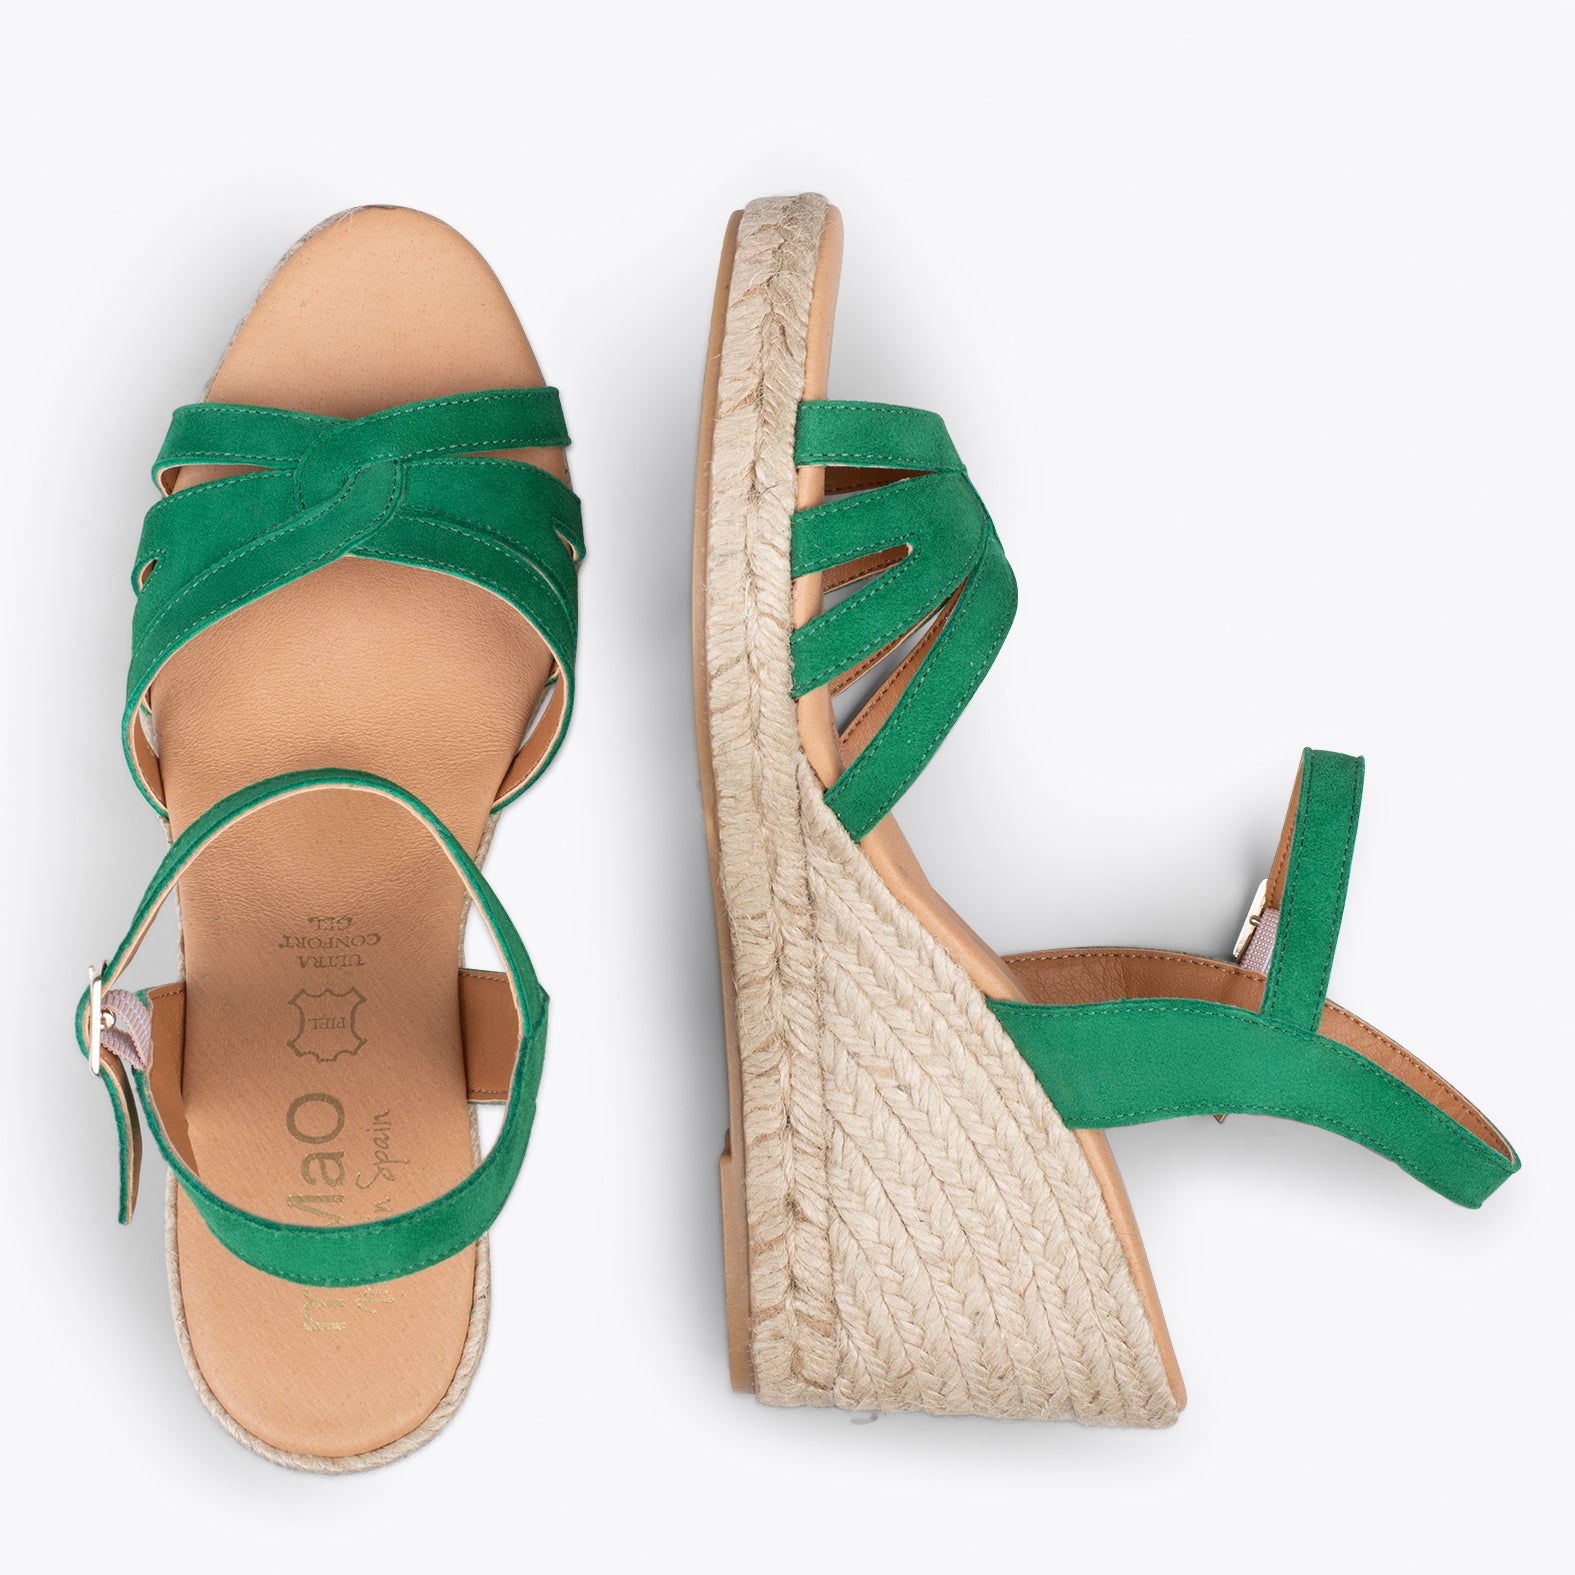 HOYAMBRE – GREEN espadrilles with braided front